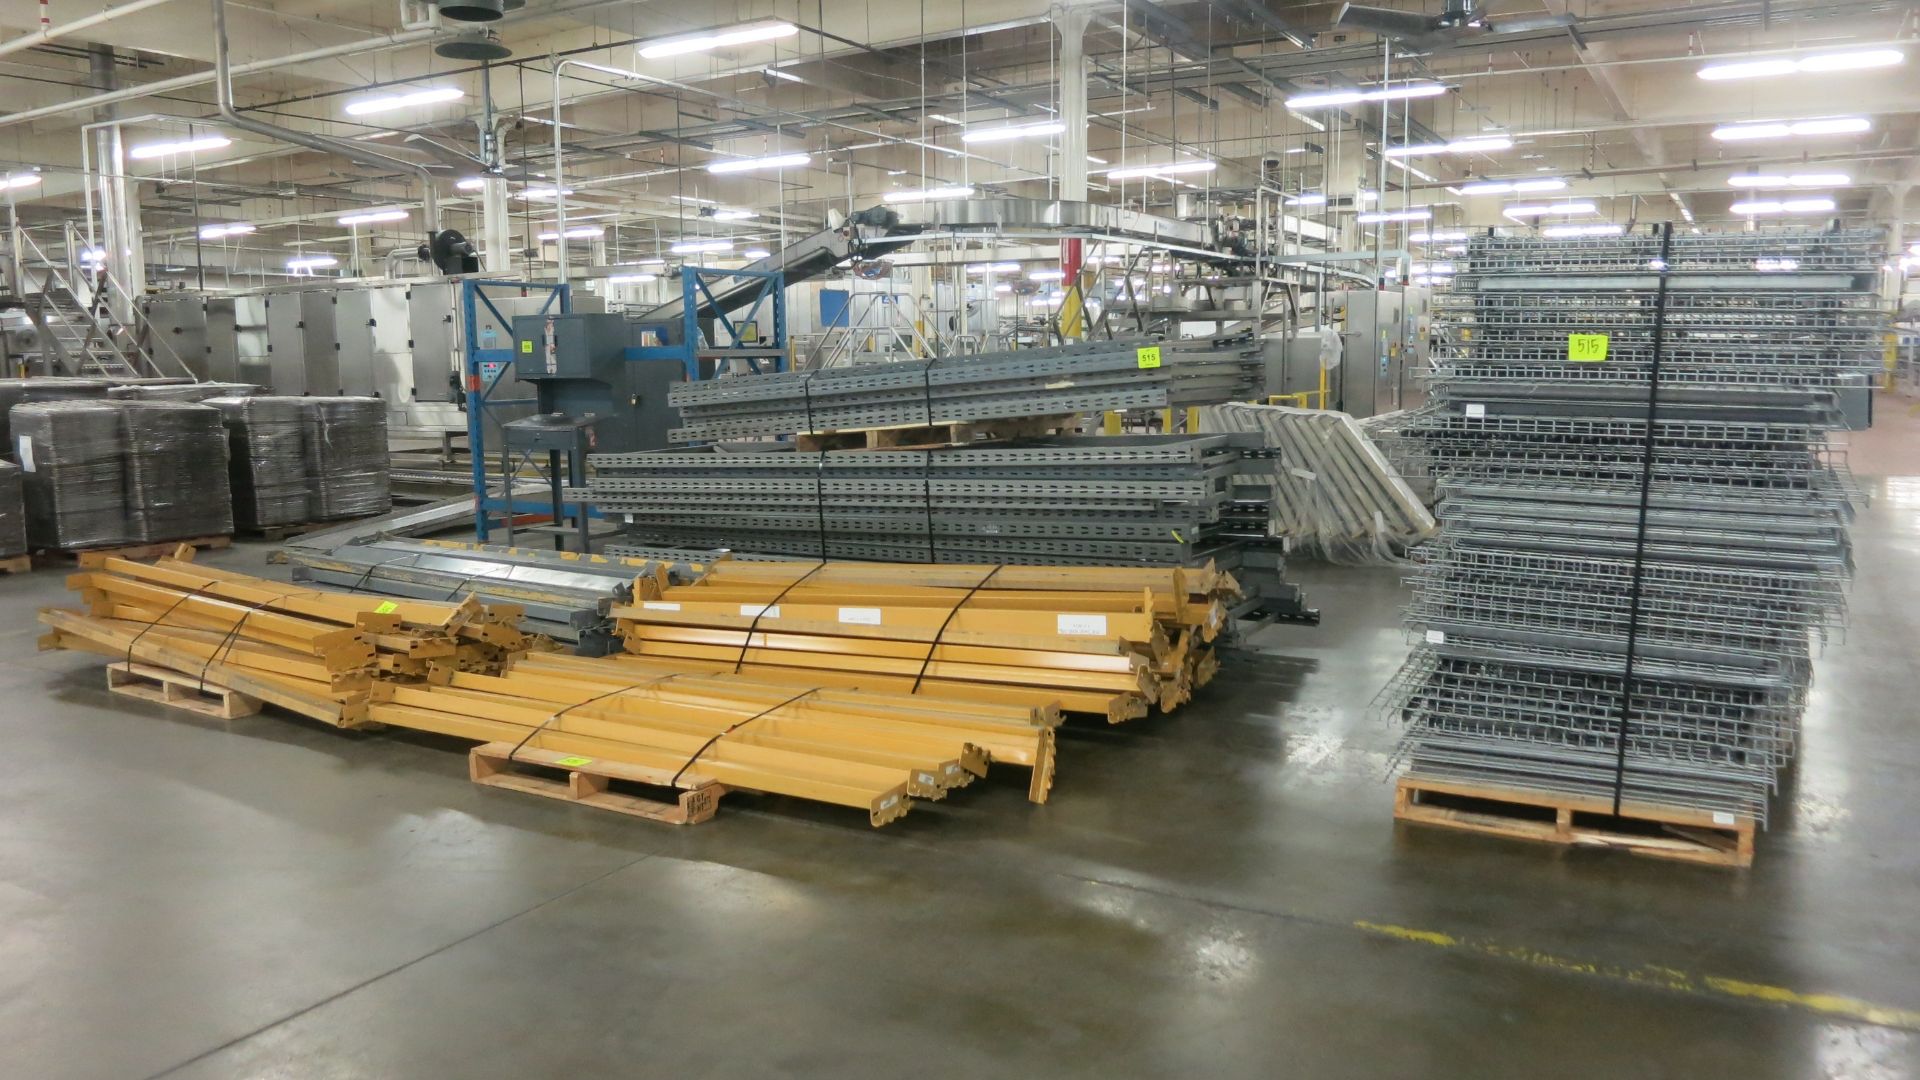 [Lot] 16-Sections pallet racks, with (13) uprights x 12', (5) uprights x 10', (55) cross beams x - Image 2 of 2